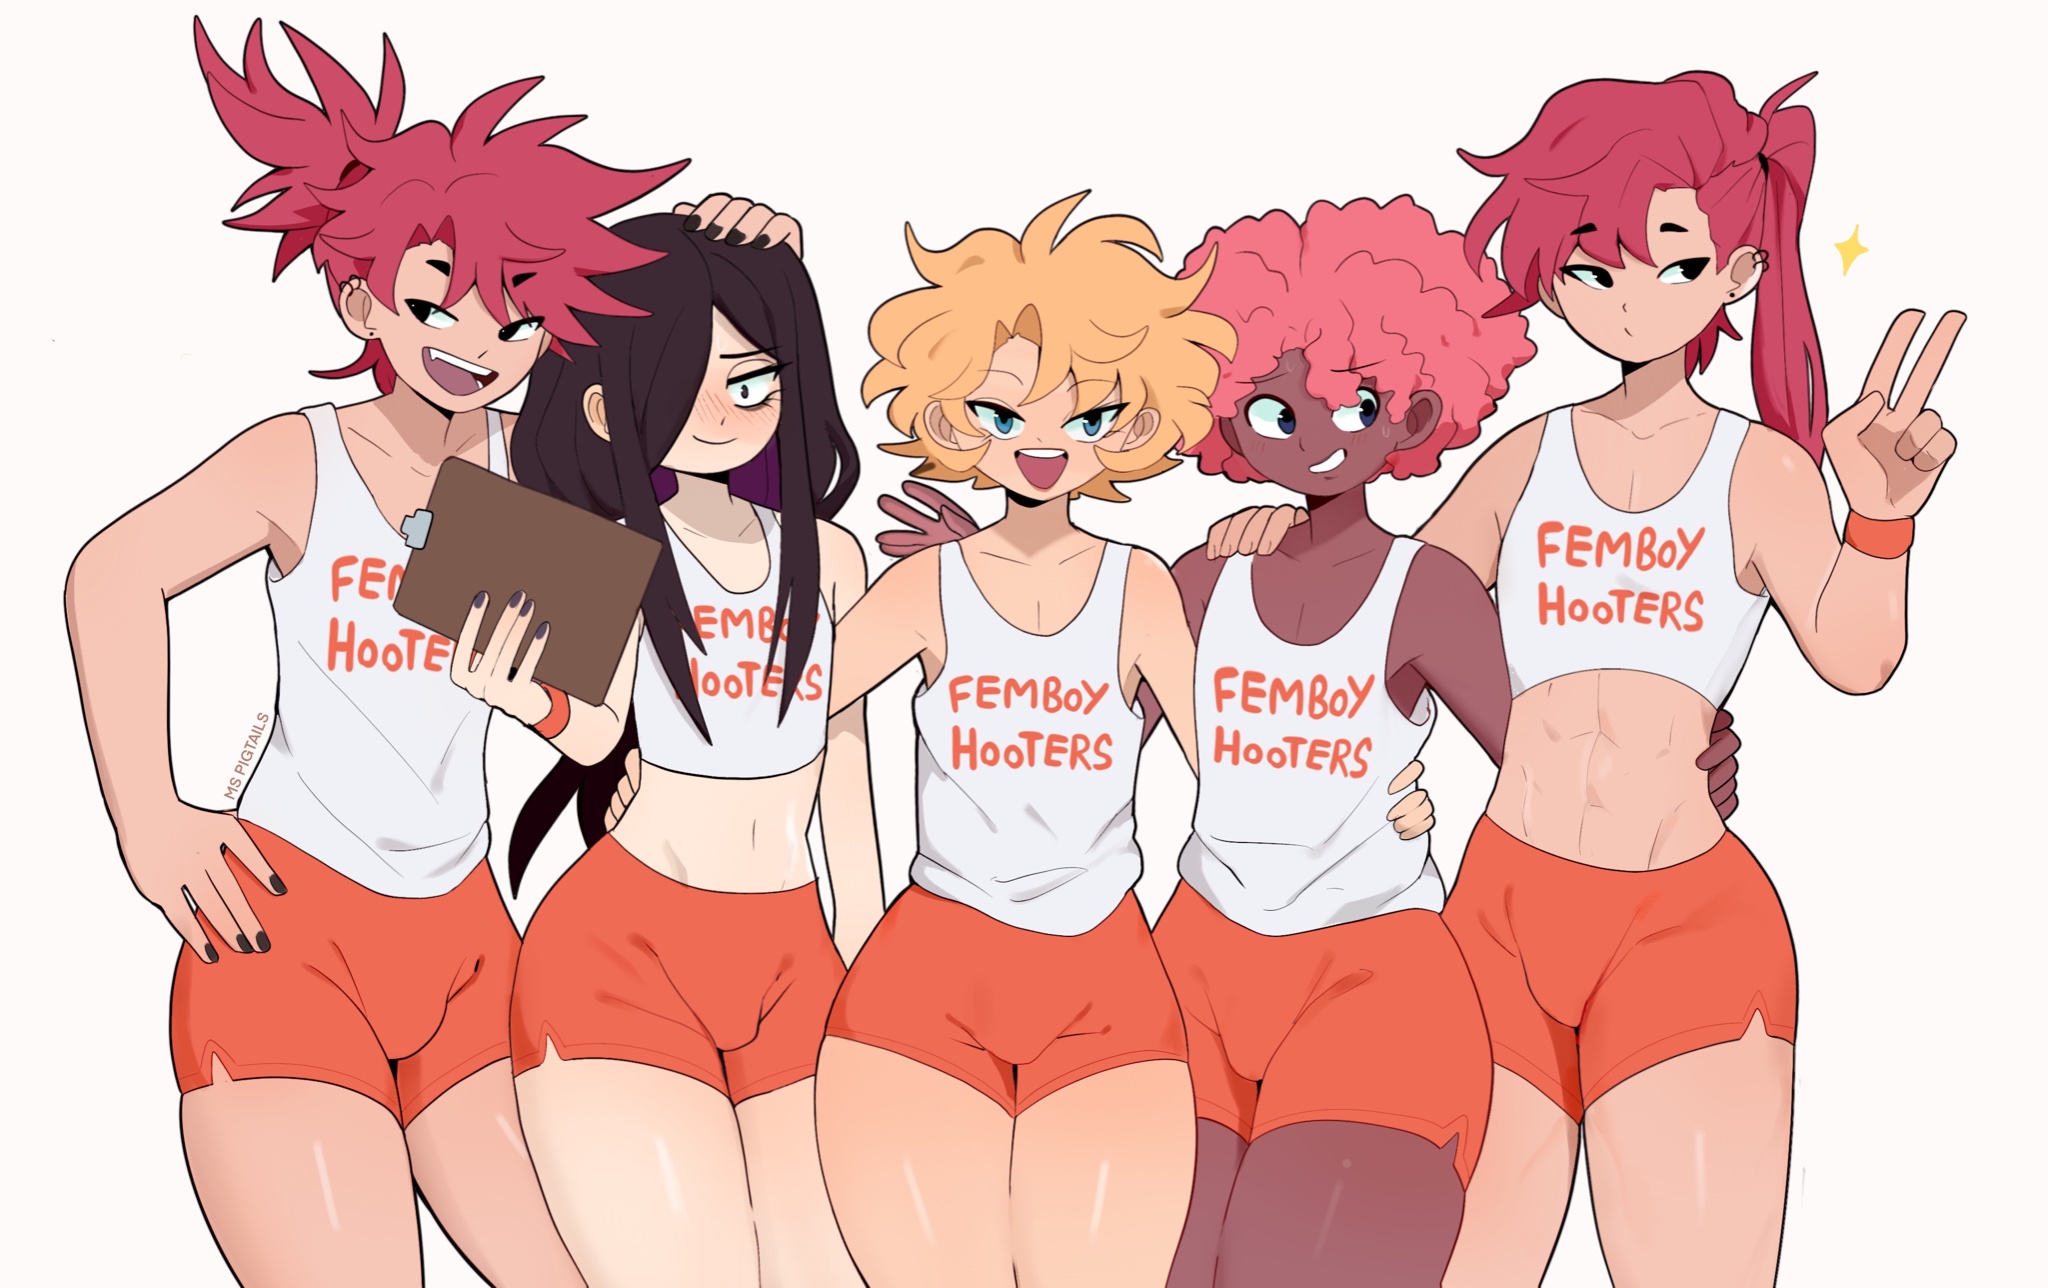 Welcome to the femboy hooters. 